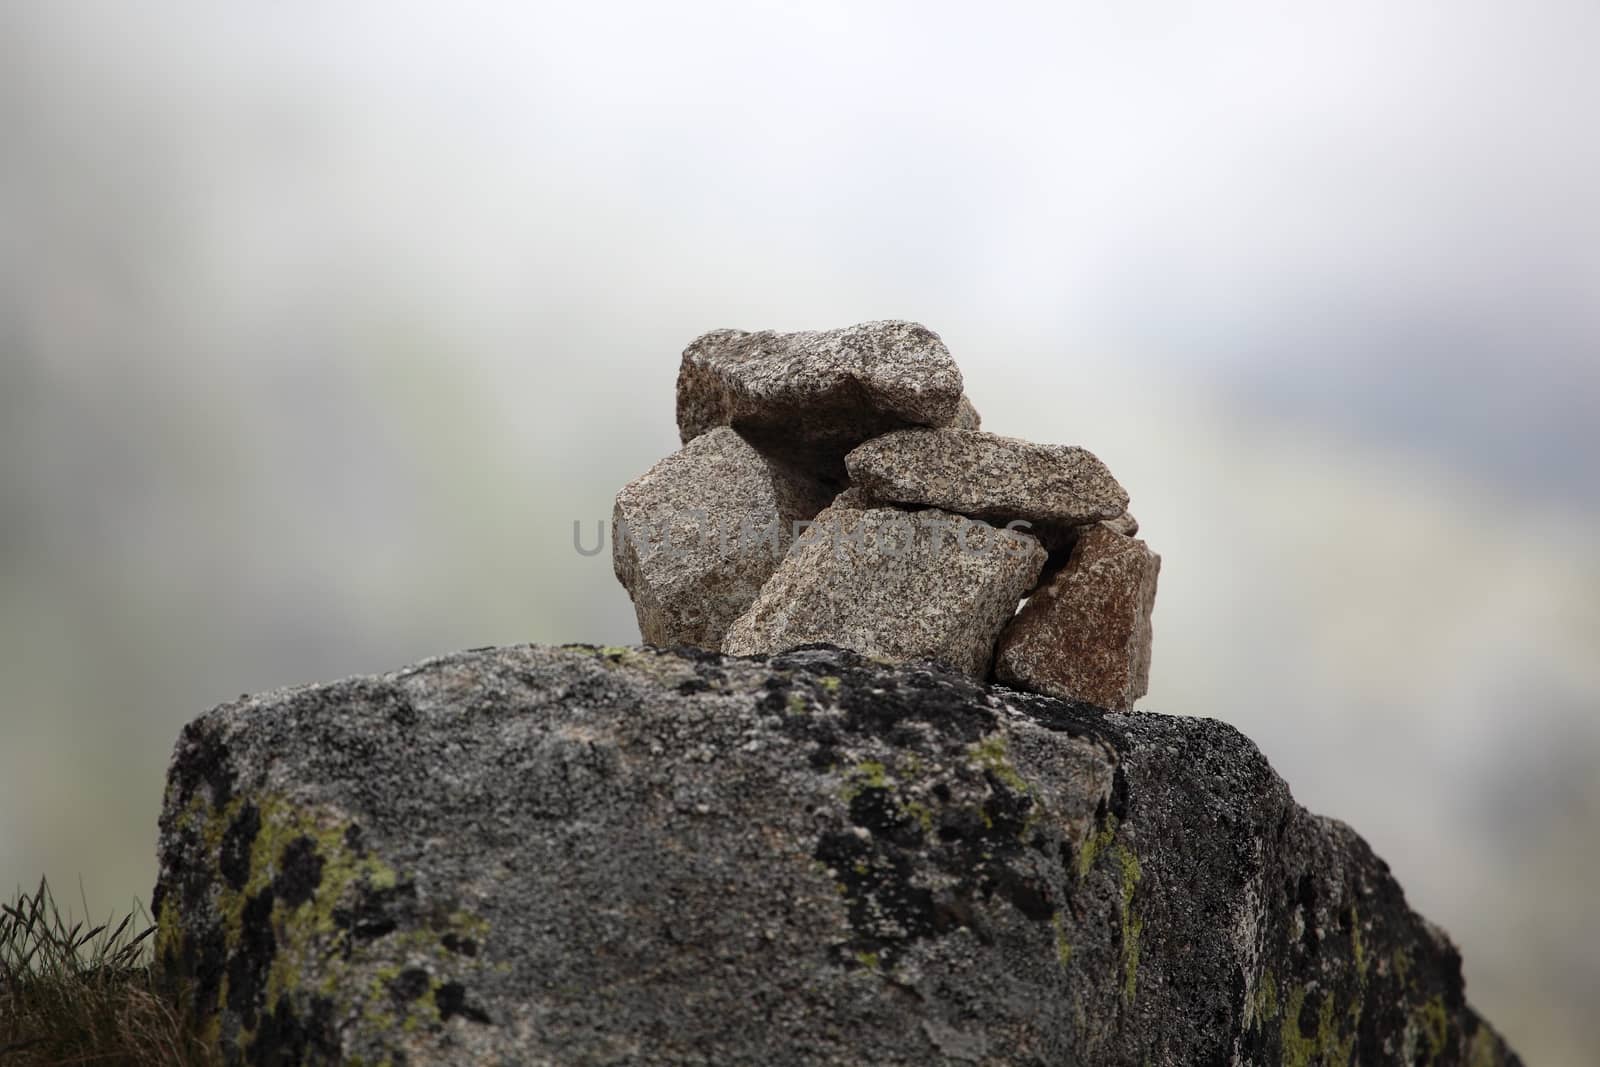 A stack of stones in the mountains.